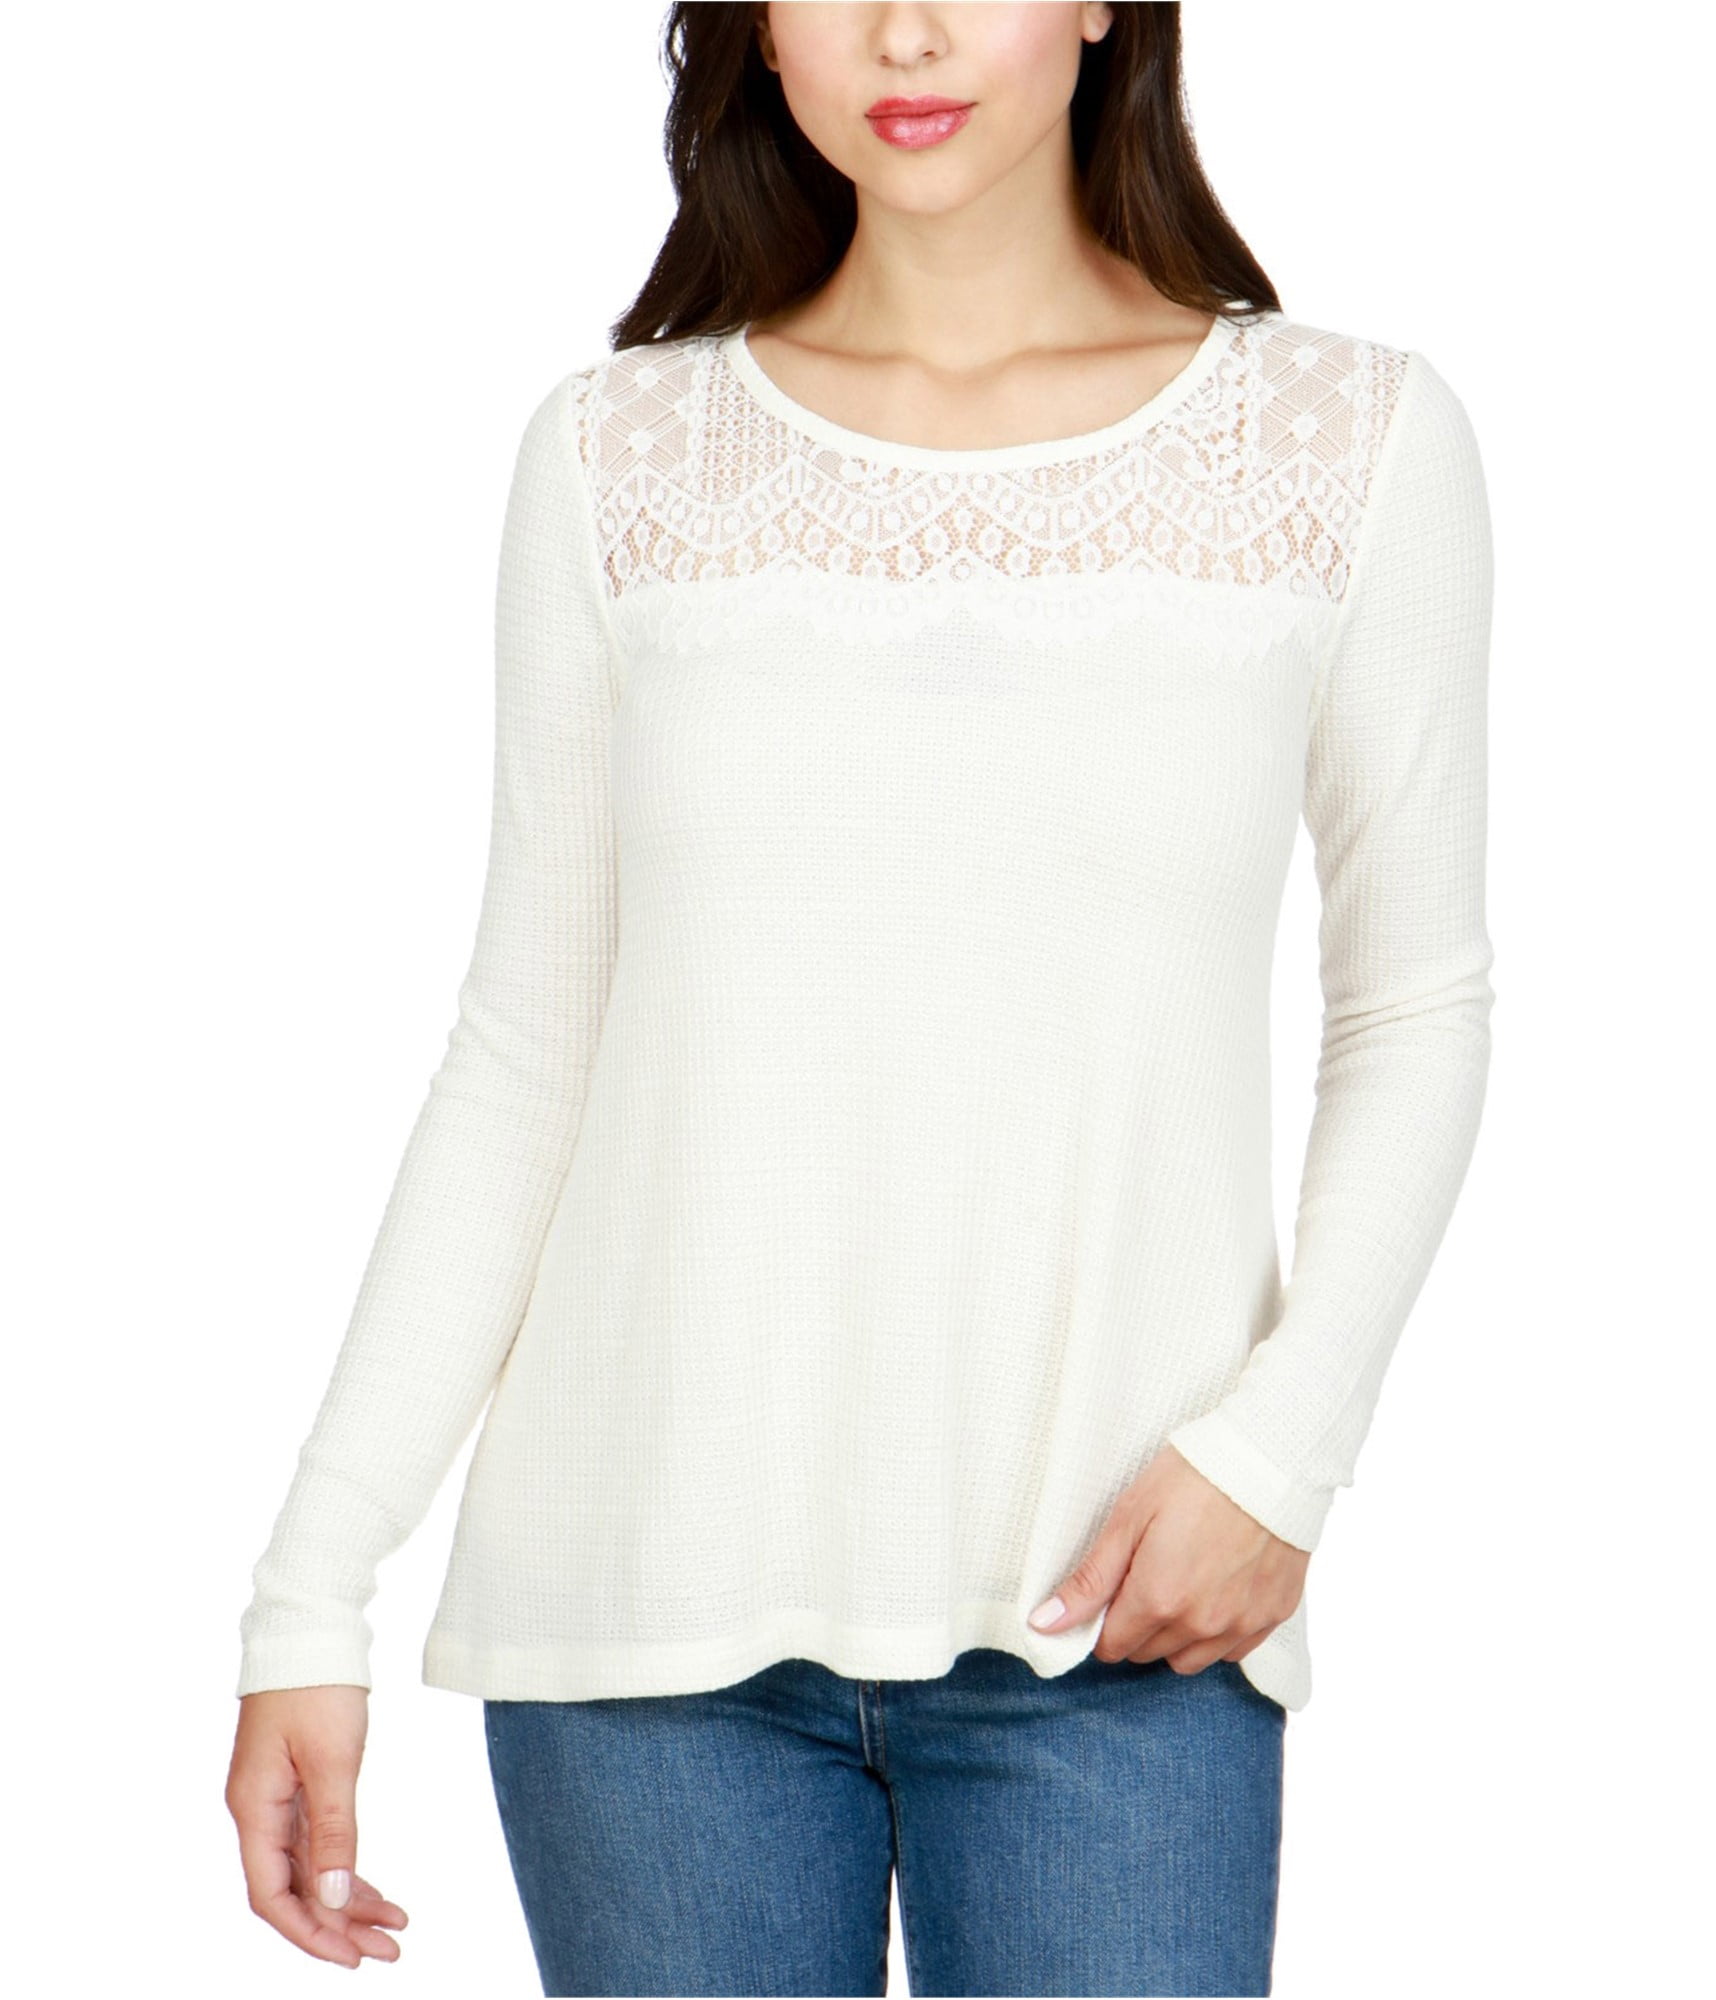 Lucky Brand - Lucky Brand Womens Lace-Trim Thermal Blouse - Walmart.com ...